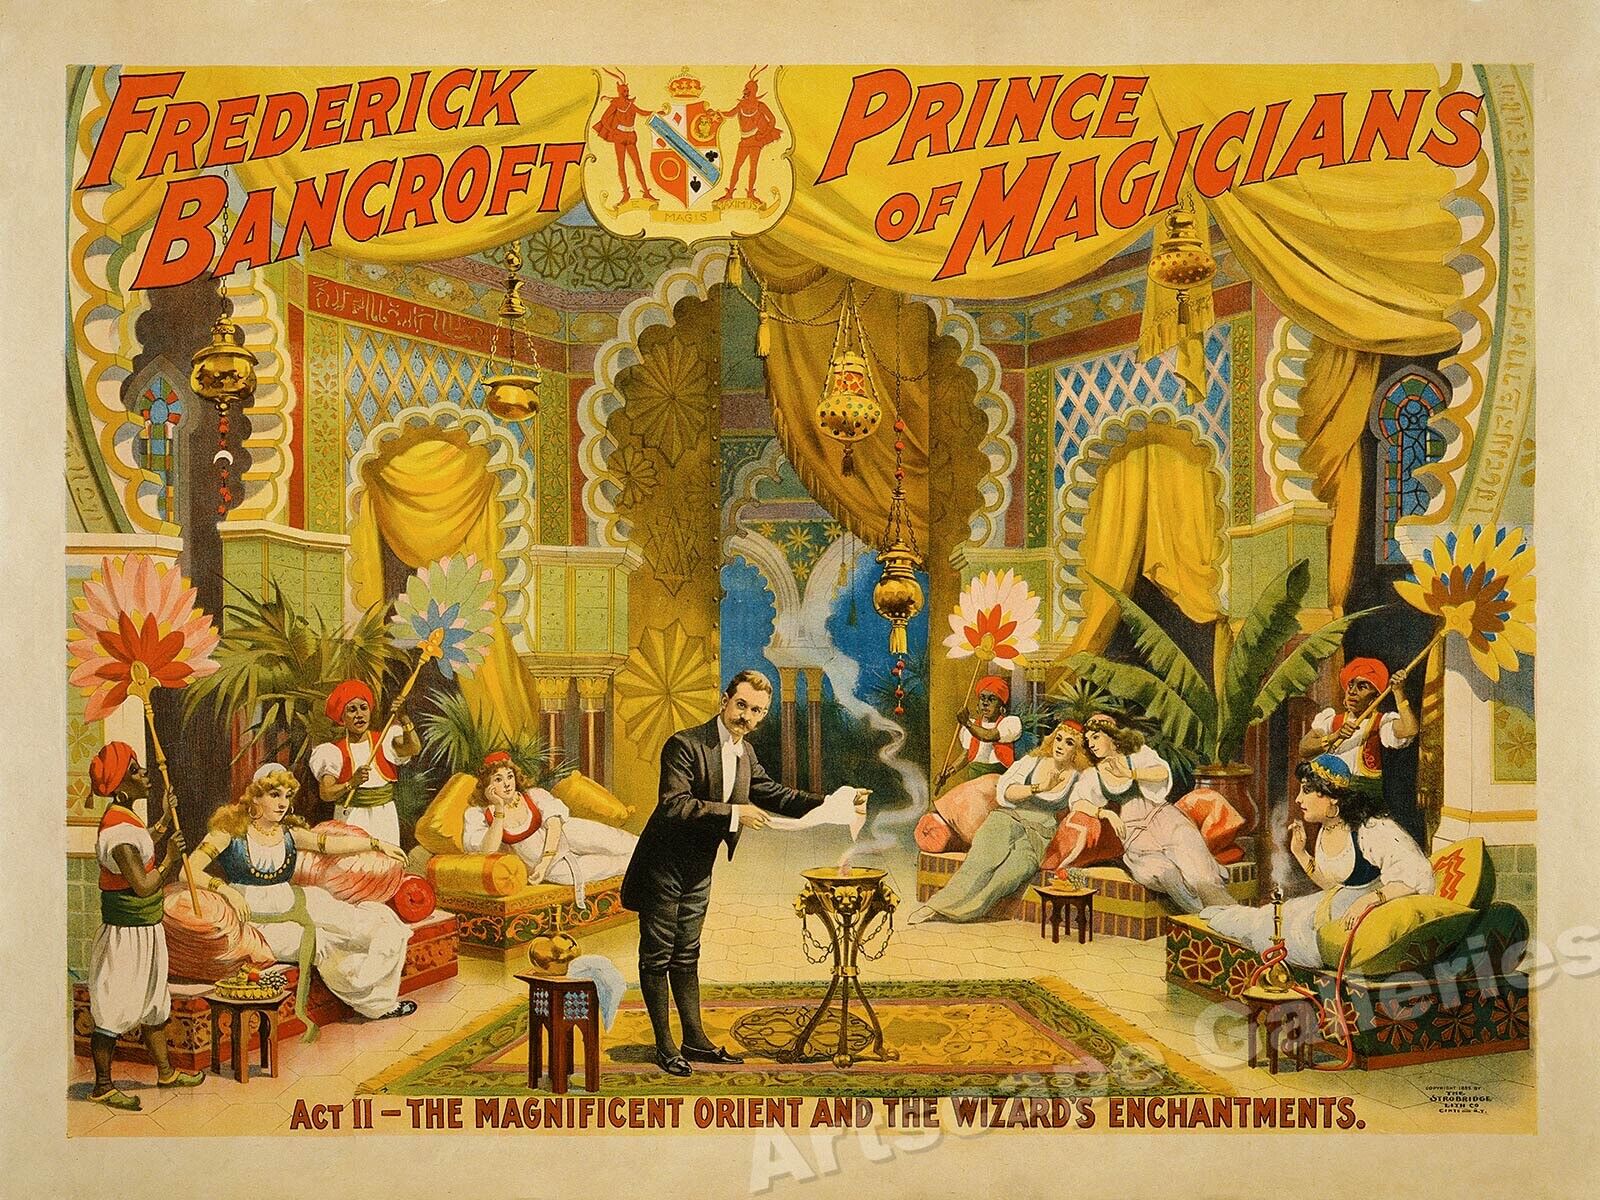 1895 Prince of Magicians Frederick Bancroft - Vintage Style Magic Poster - 18x24